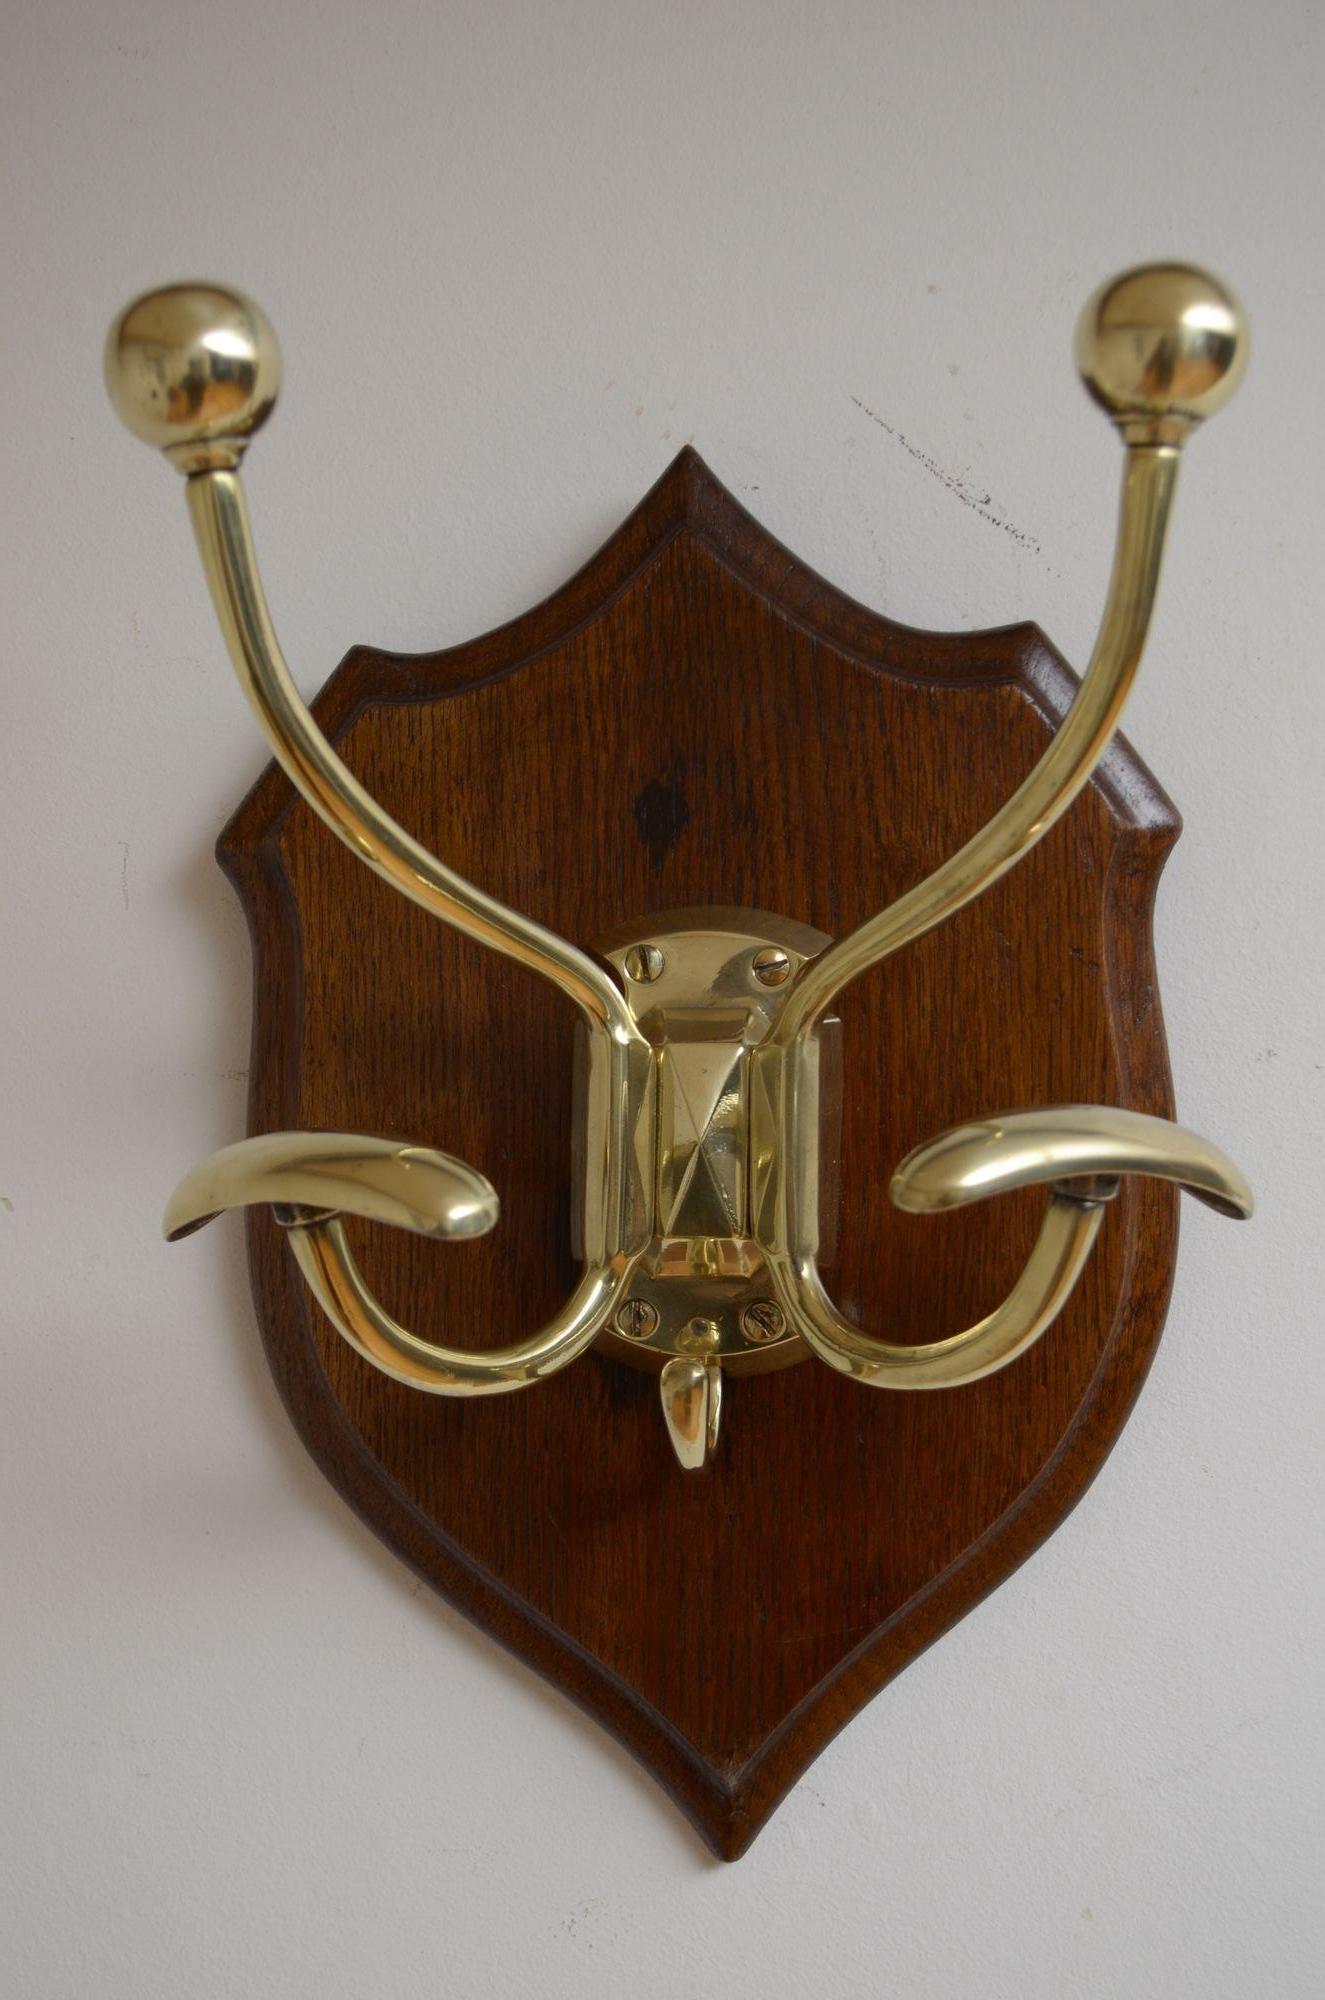 k0298 Stylish Victorian brass hooks with double coat and hat hooks now on Victorian solid oak shield shaped backing. The hooks have been cleaned and polished, all in home ready condition. c1880
H13.5